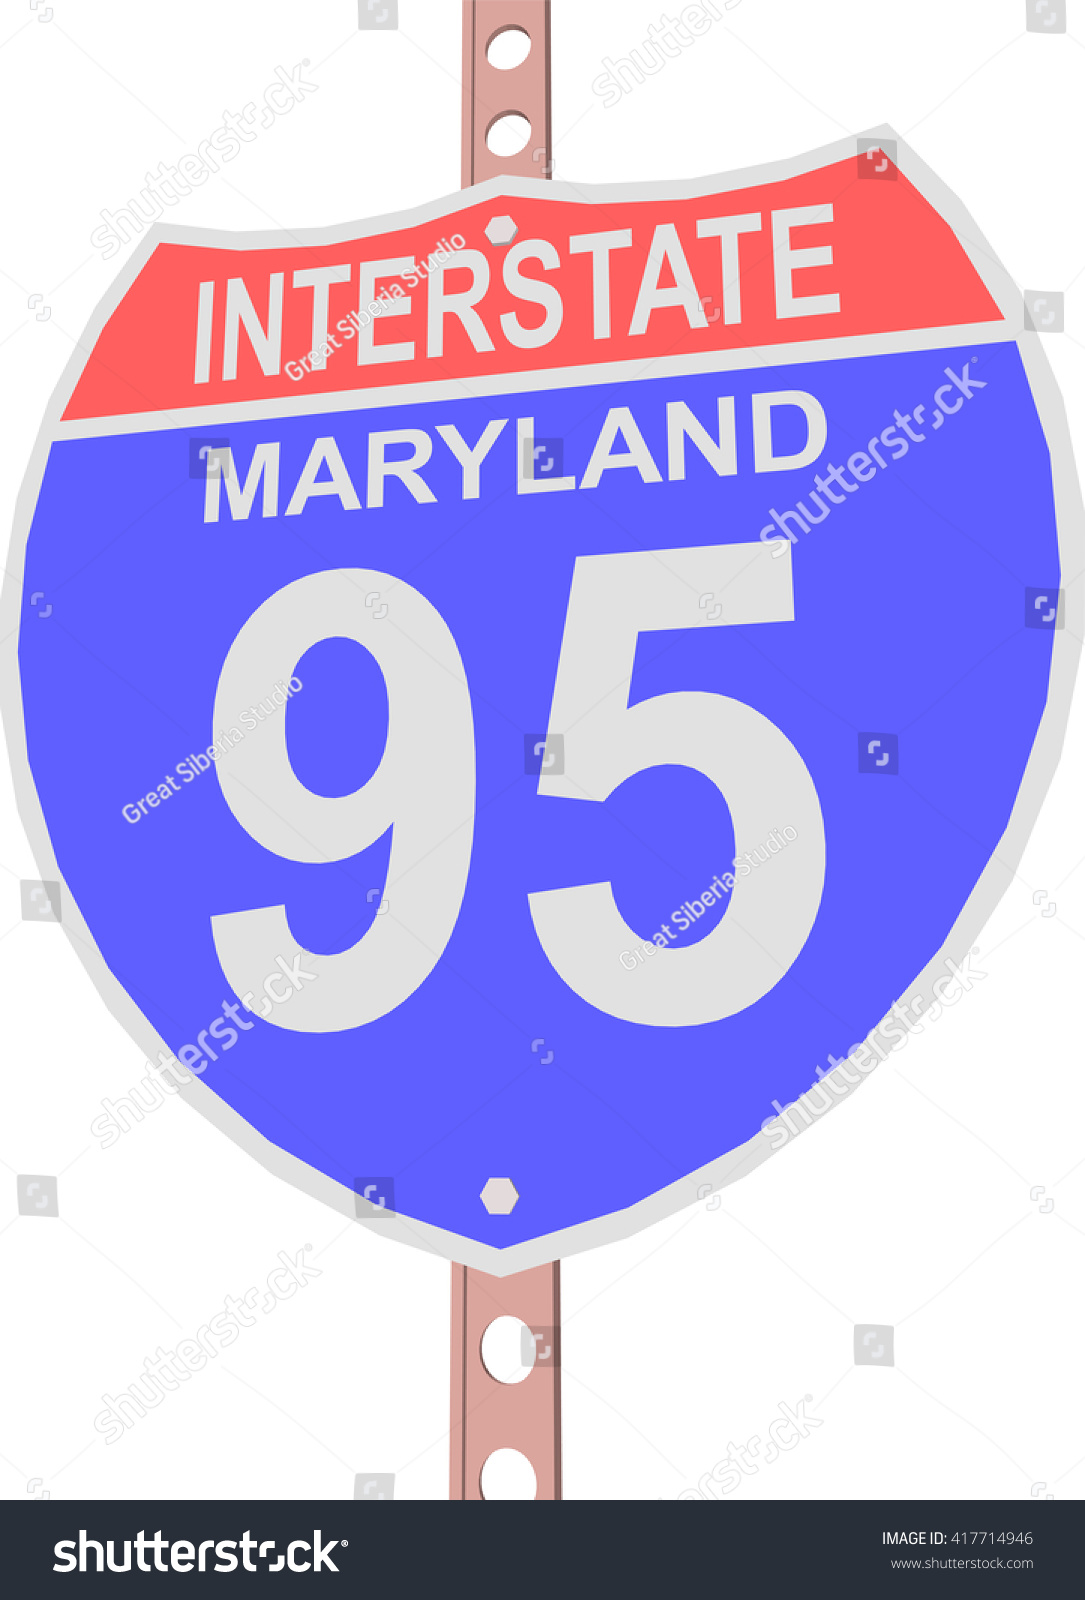 Interstate highway 95 road sign in Maryland #417714946